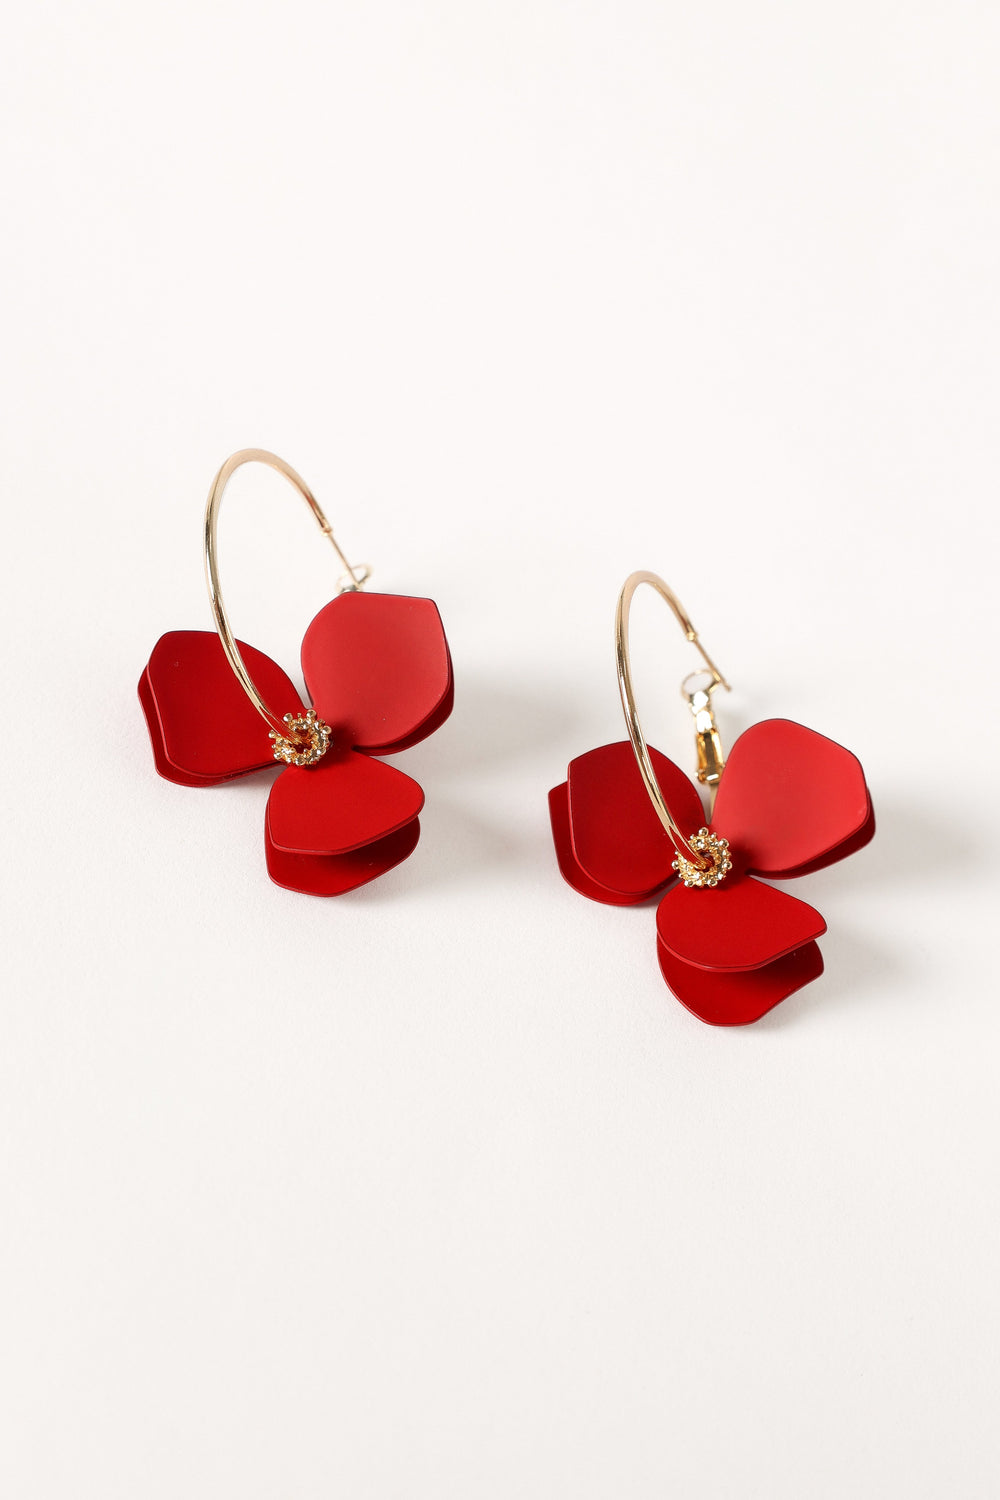 Petal and Pup USA ACCESSORIES Willow Flower Earrings - Gold Red One Size